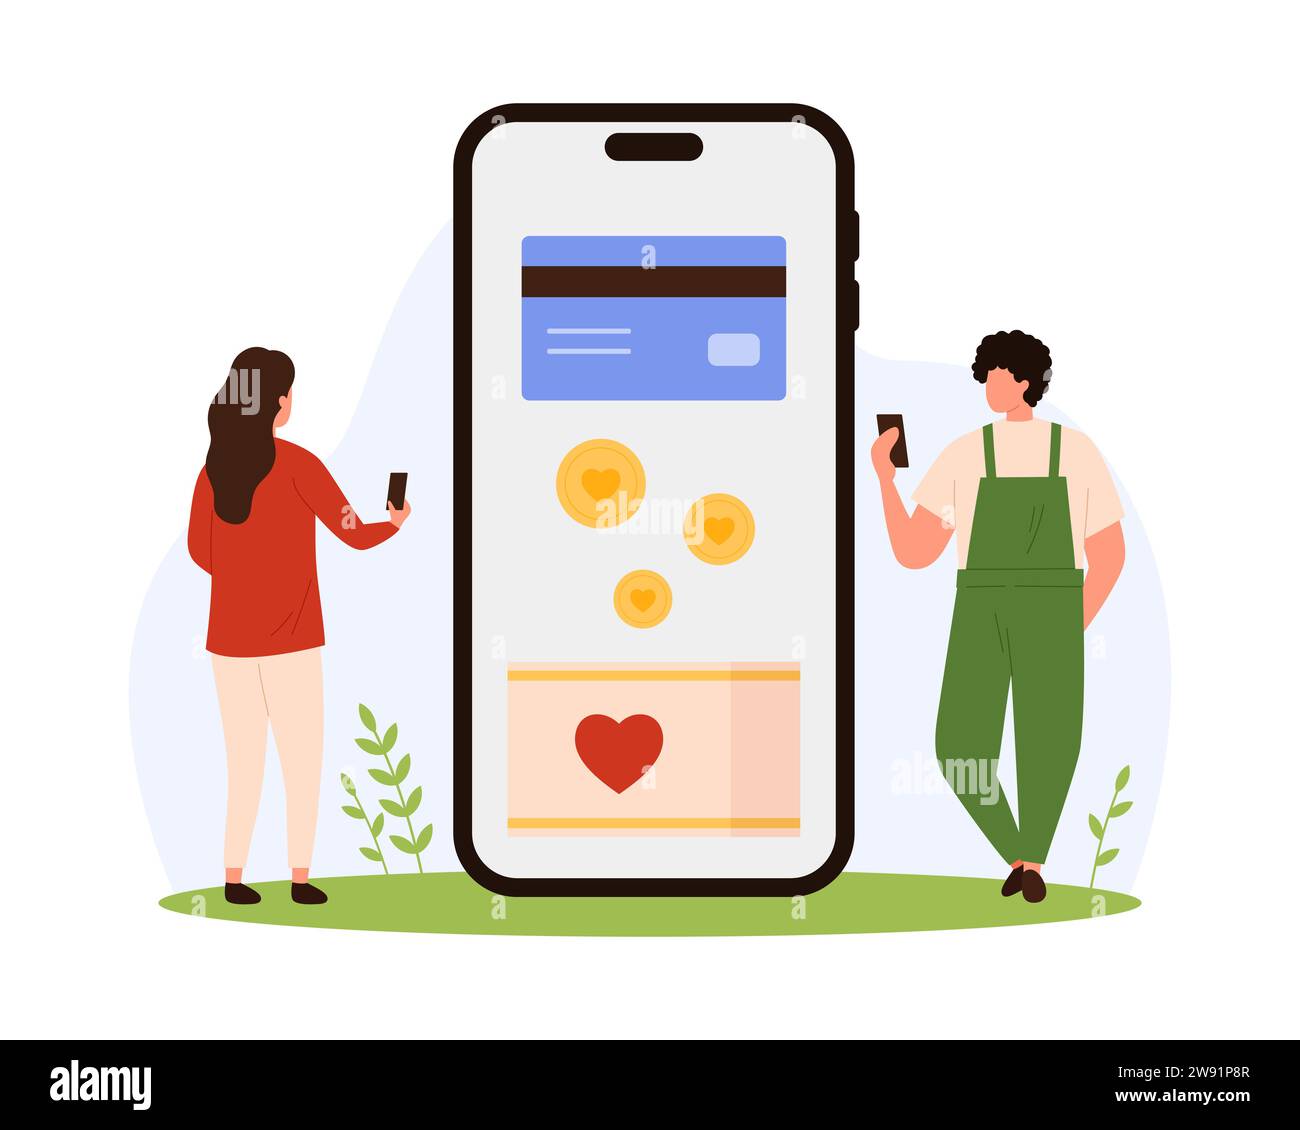 Charity mobile app, humanitarian aid campaign from community vector illustration. Cartoon tiny people donate online with phone, volunteers give money Stock Vector